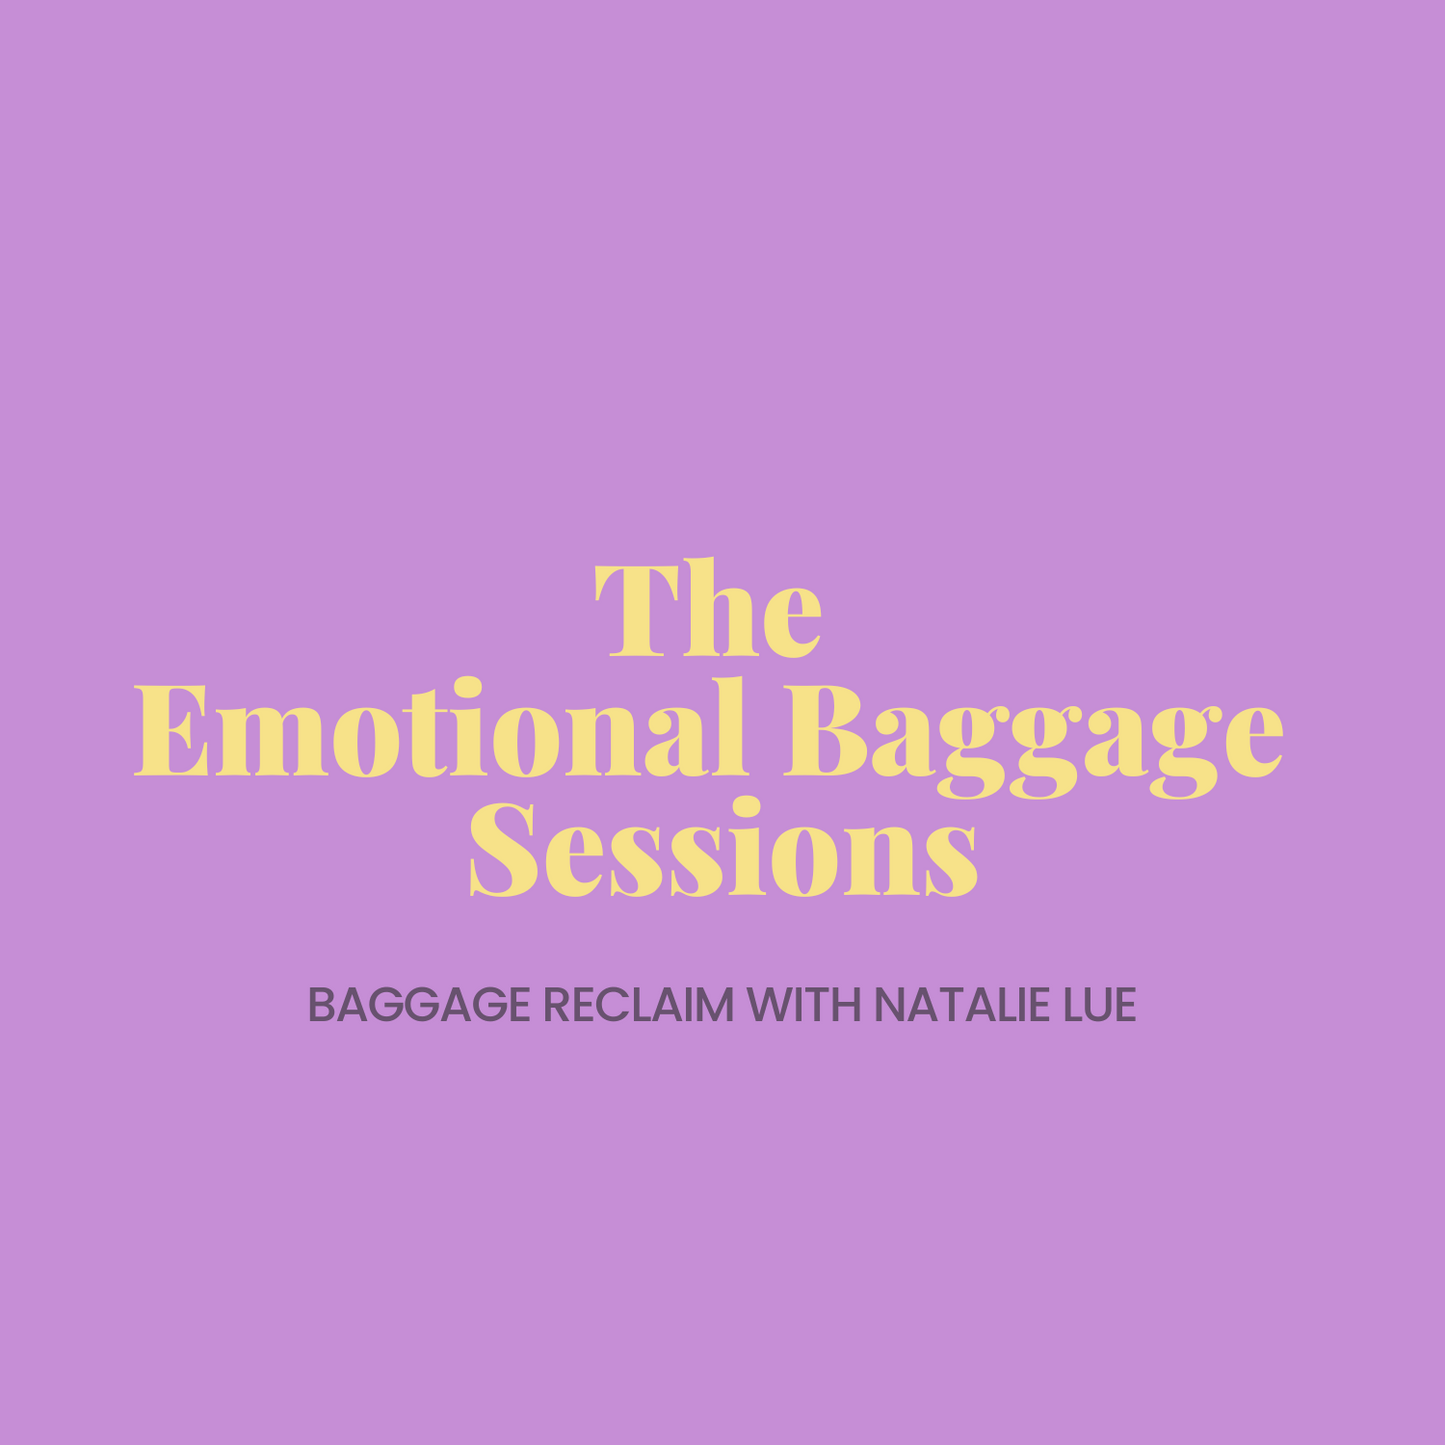 The Emotional Baggage Sessions